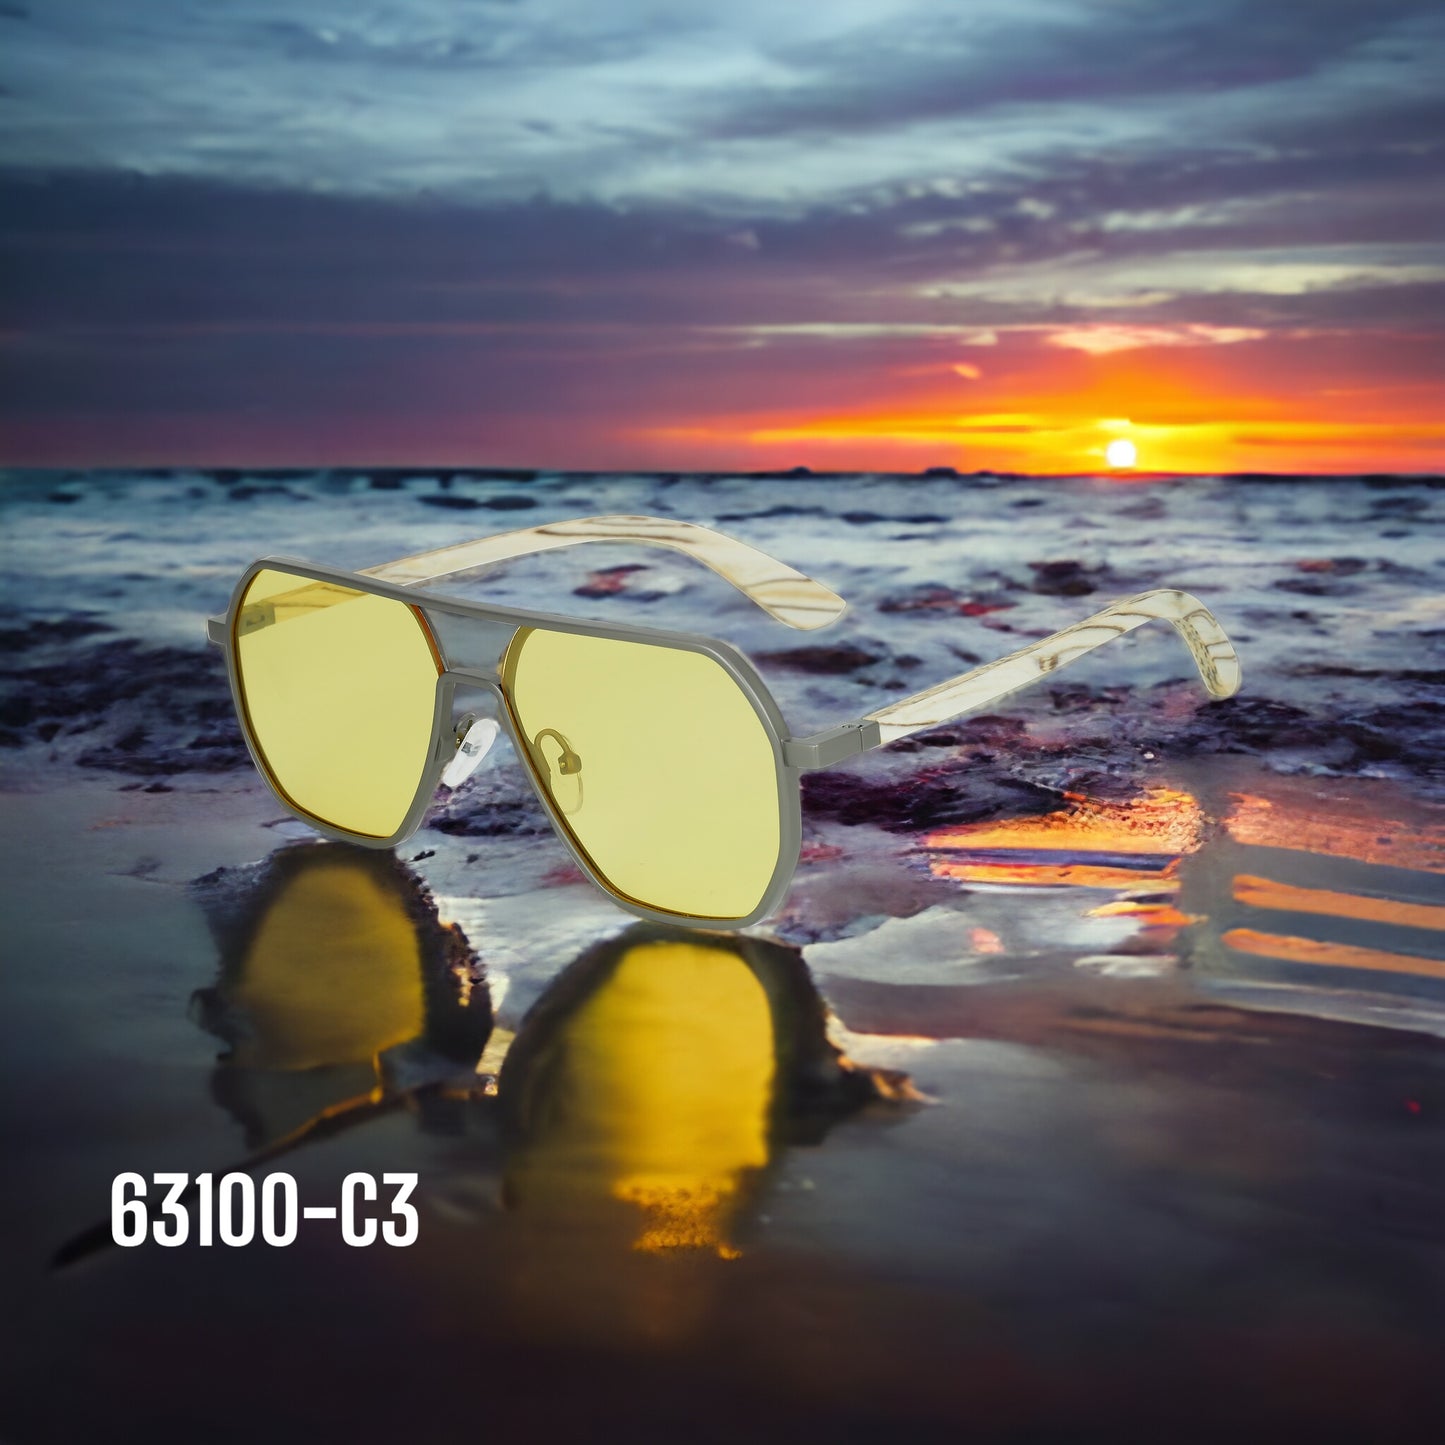 63100-C3 Stylish Sunglasses with colored Wood/Bamboo Frame UV400 Lens fit all weather